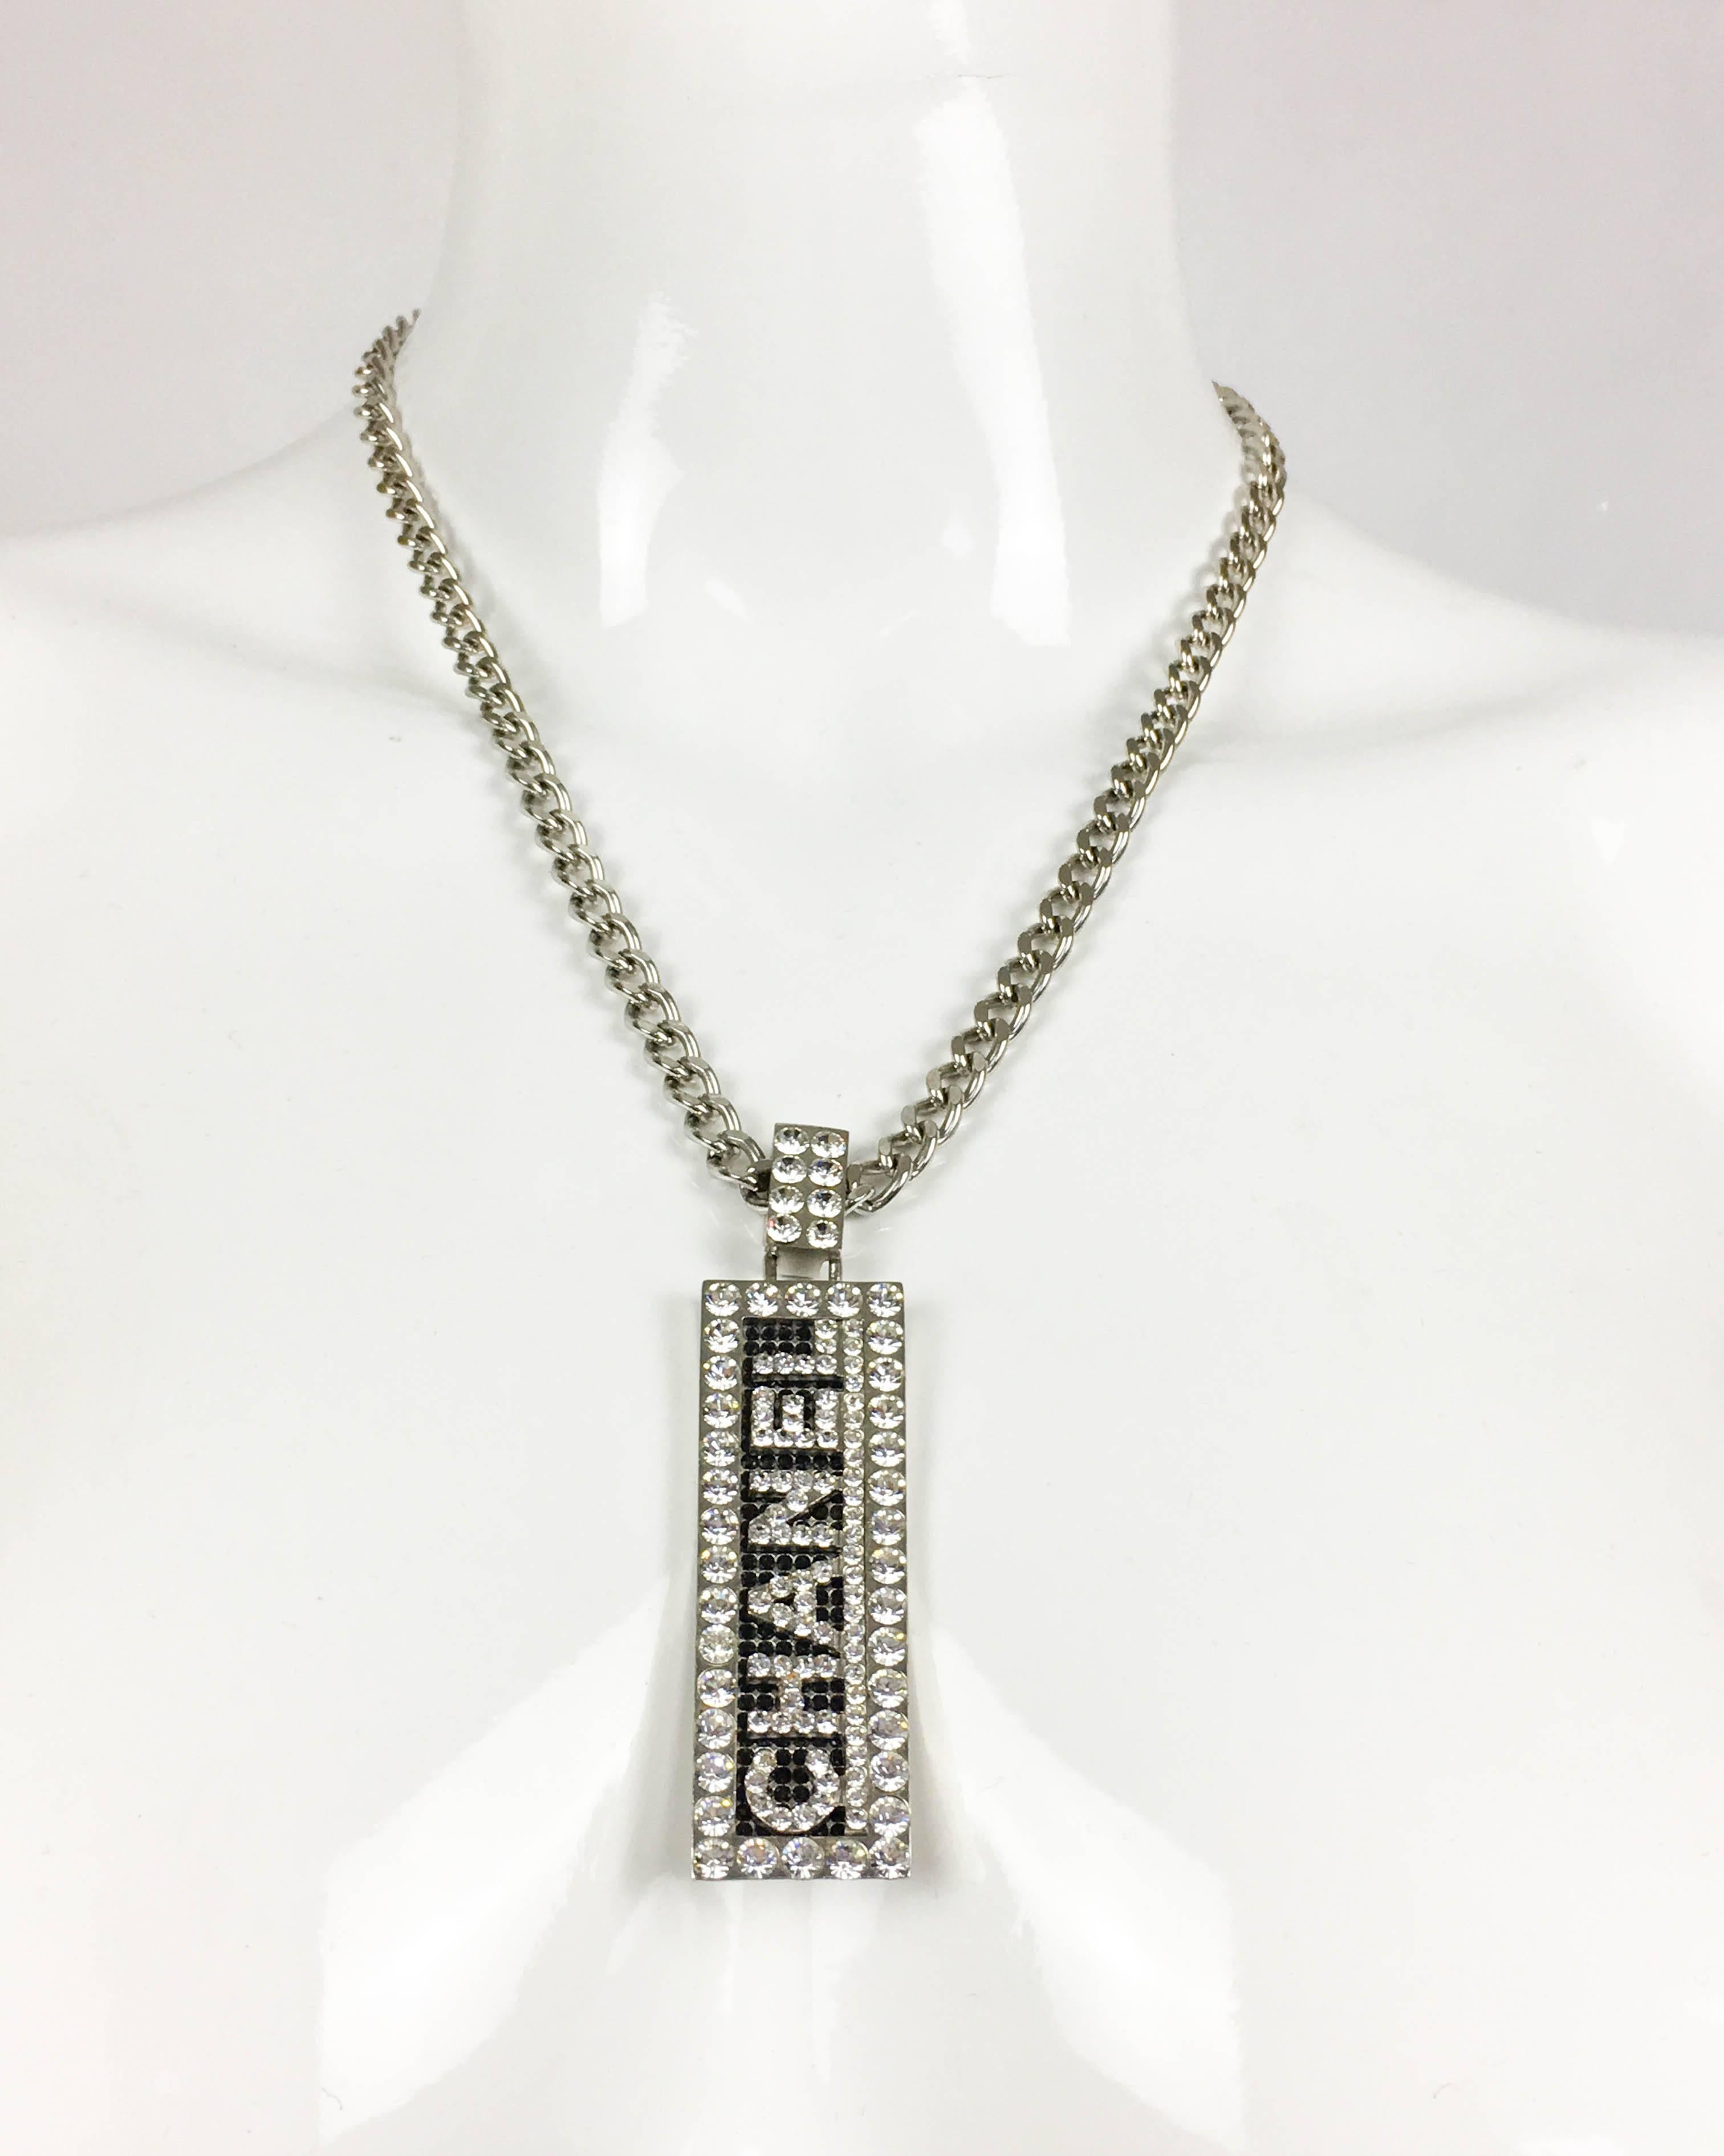 Chanel Rhinestone Plaque Pendant Necklace. This gorgeous piece by Chanel was created for the 2003 Fall / Winter collection. It features a white metal chain with plaque pendant saying Chanel in white crystals on a black rhinestone background. Chanel